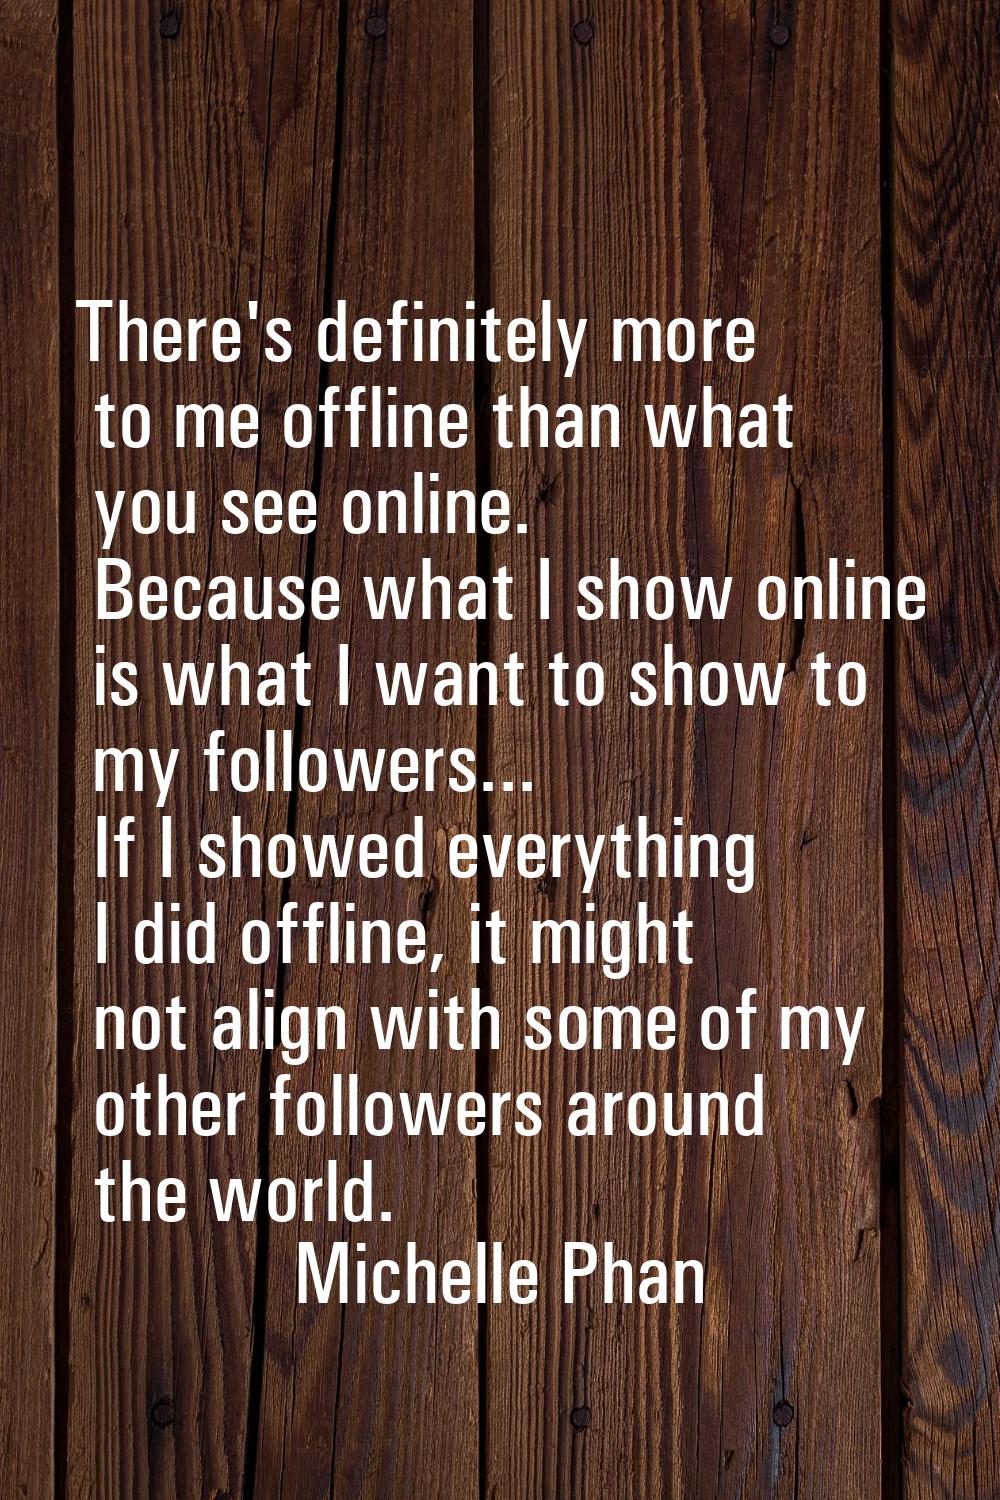 There's definitely more to me offline than what you see online. Because what I show online is what 